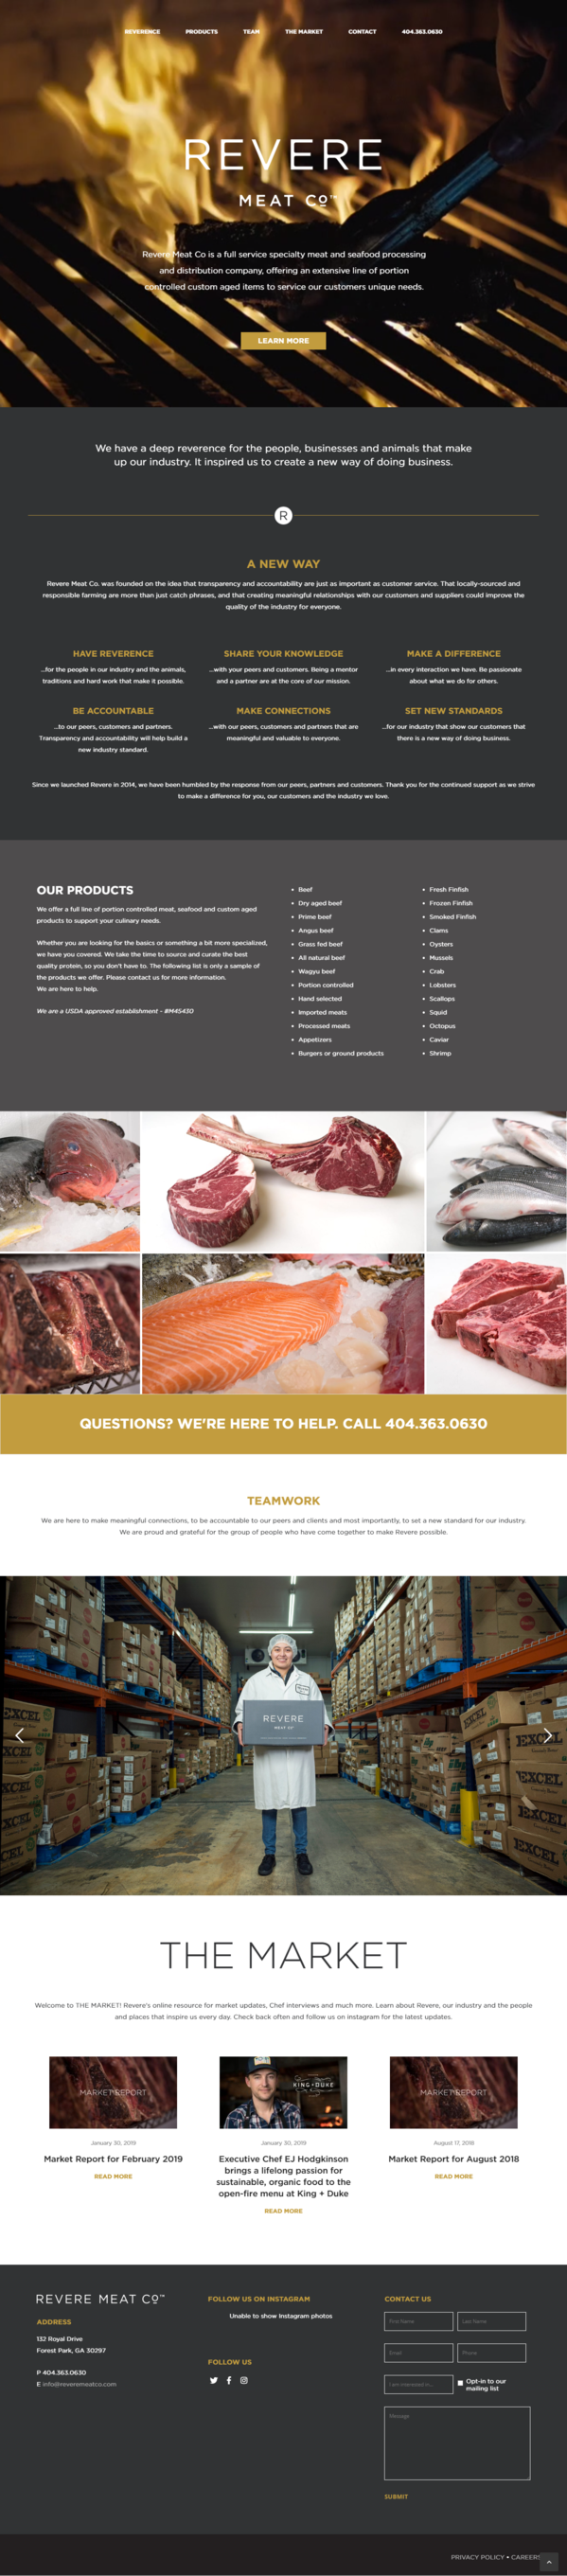 Revere Meat Co.   Full service specialty meat processing and distribution company.png